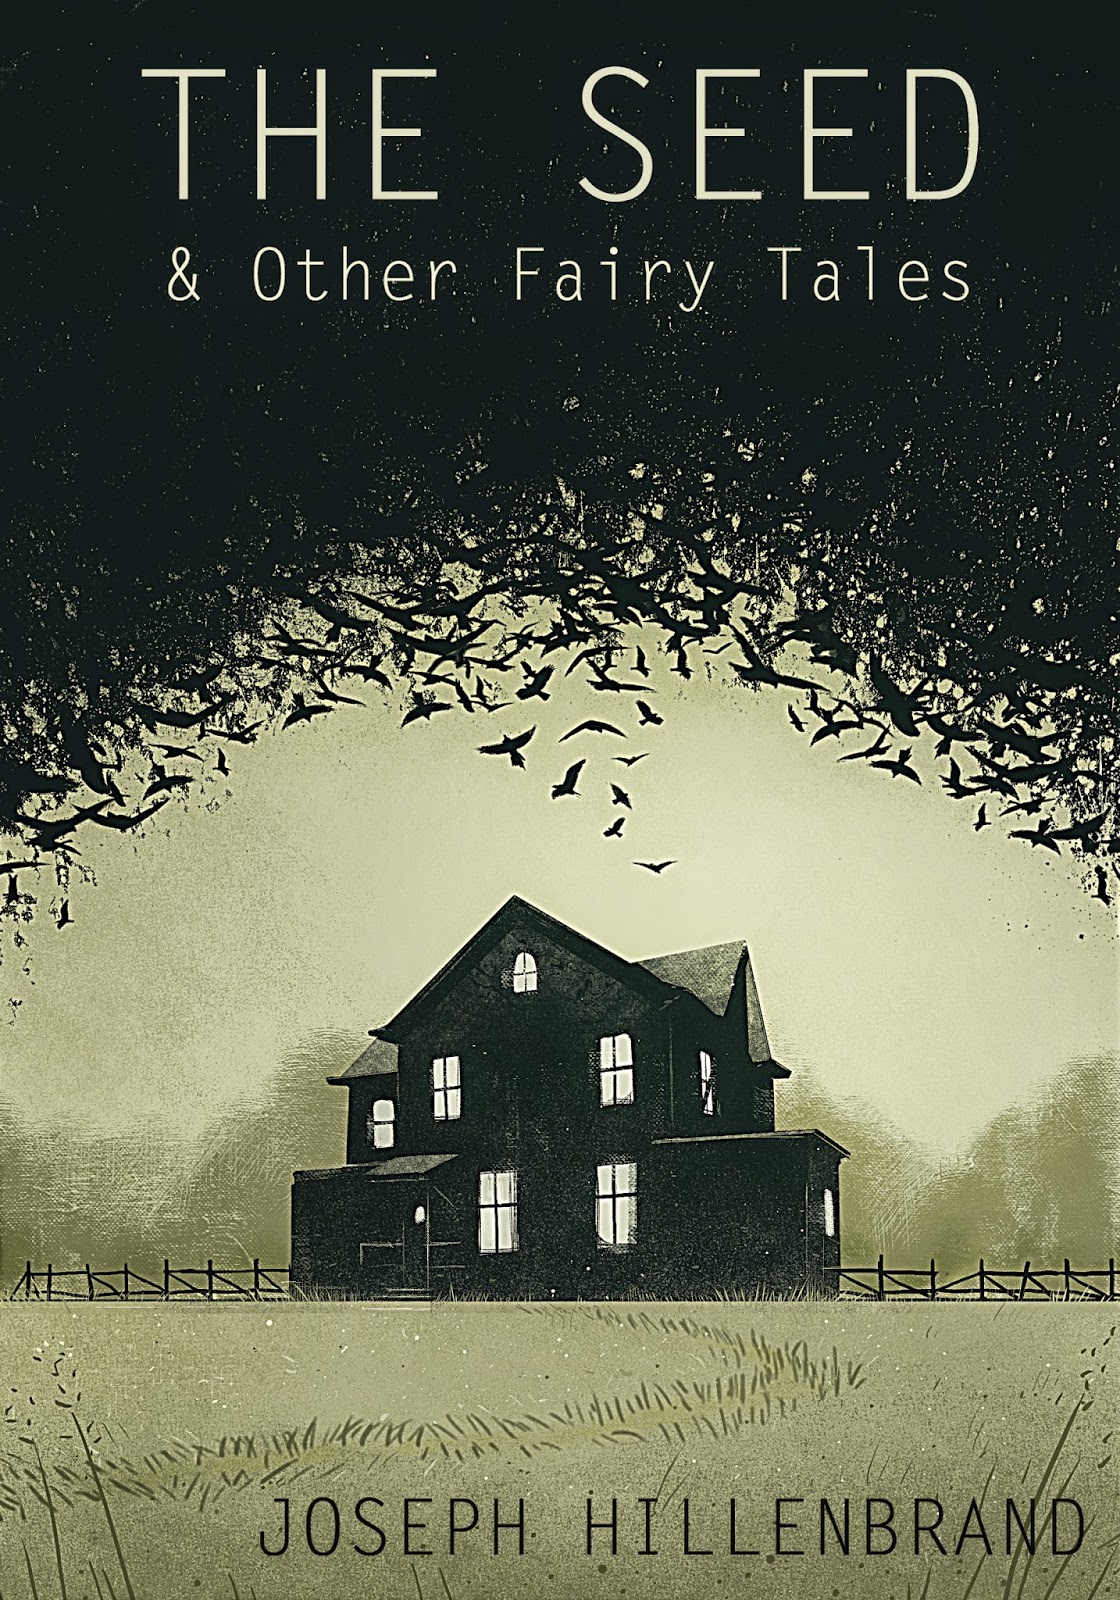 https://www.goodreads.com/book/show/20311797-the-seed-other-fairy-tales